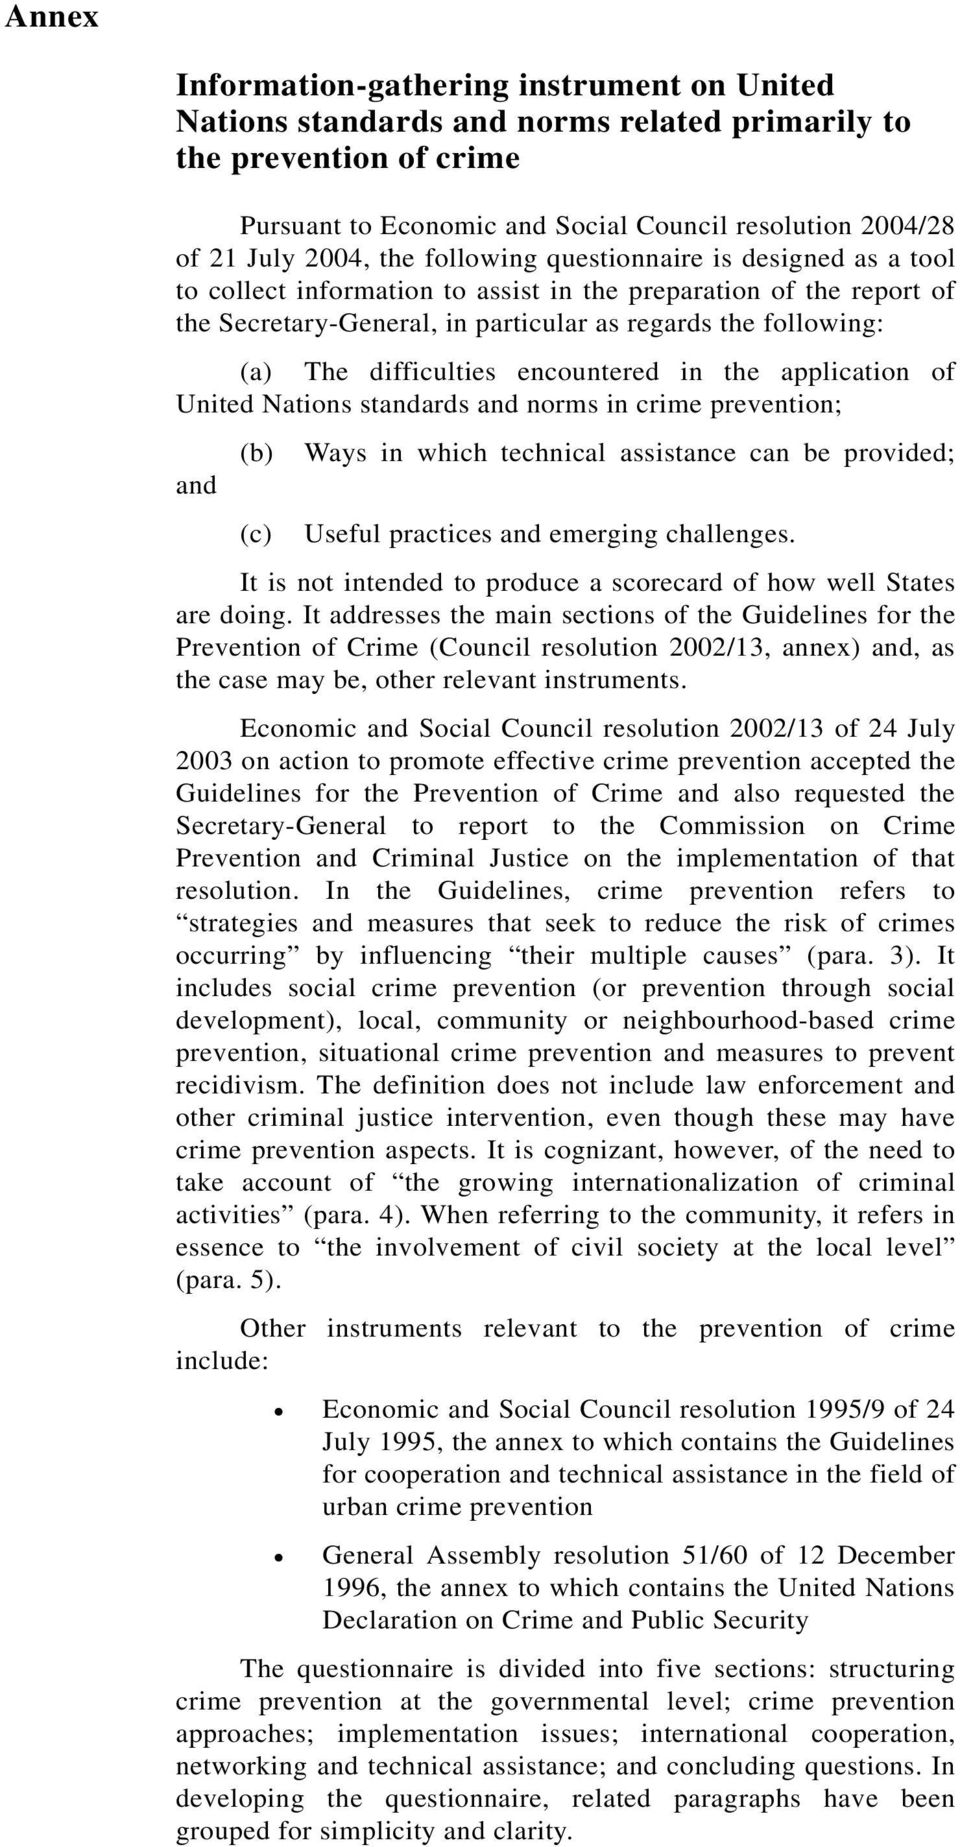 difficulties encountered in the application of United Nations standards and norms in crime prevention; and (b) Ways in which technical assistance can be provided; (c) Useful practices and emerging